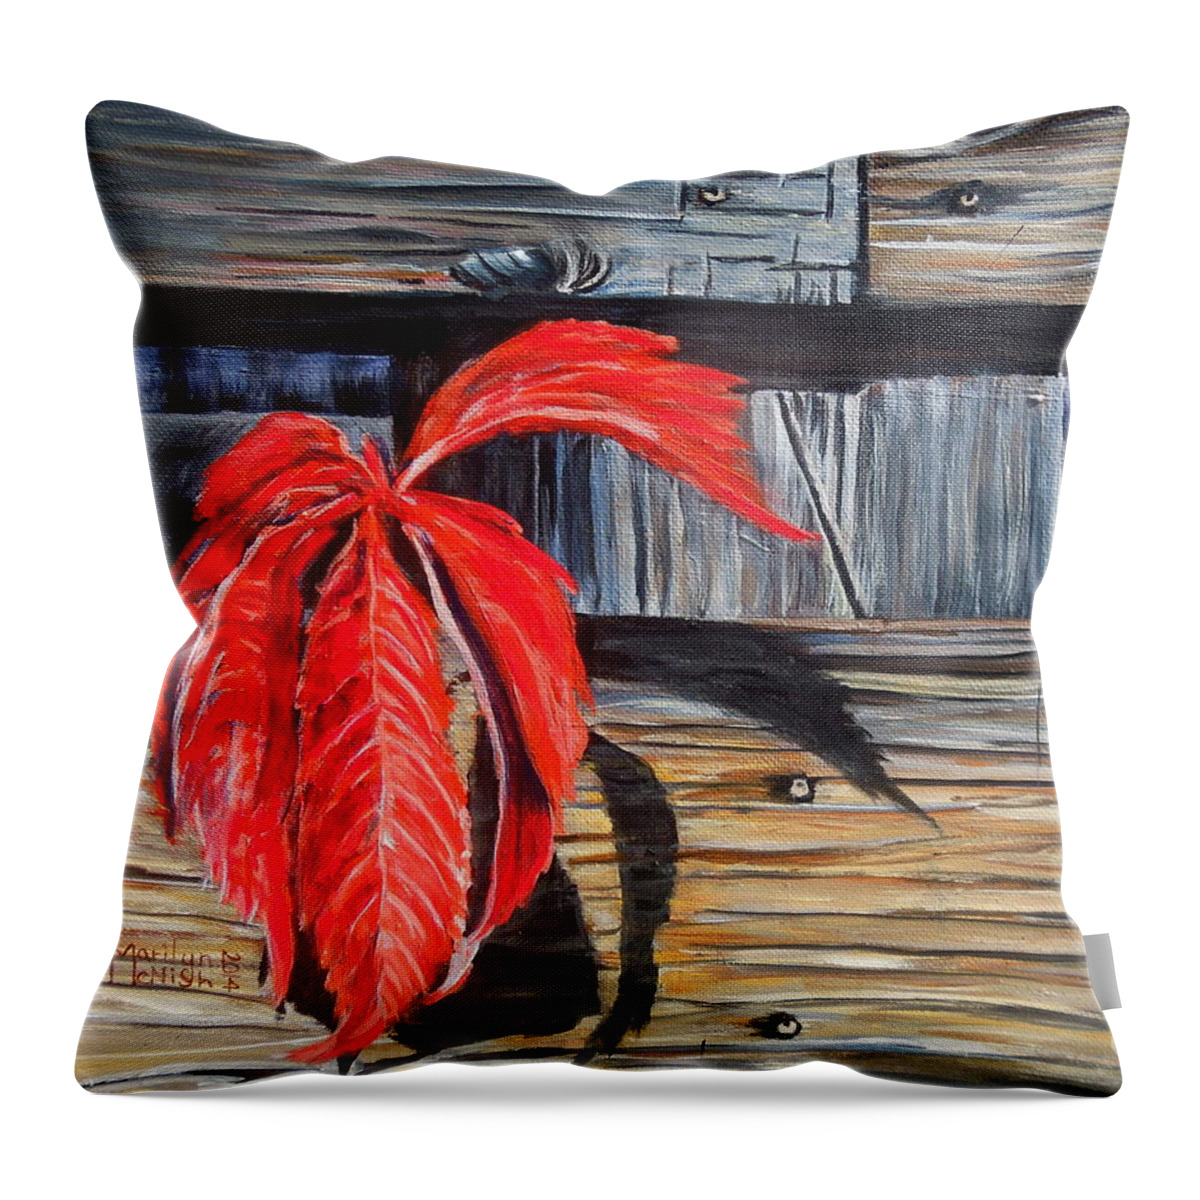 Planks Throw Pillow featuring the painting Leaf shadow 2 by Marilyn McNish